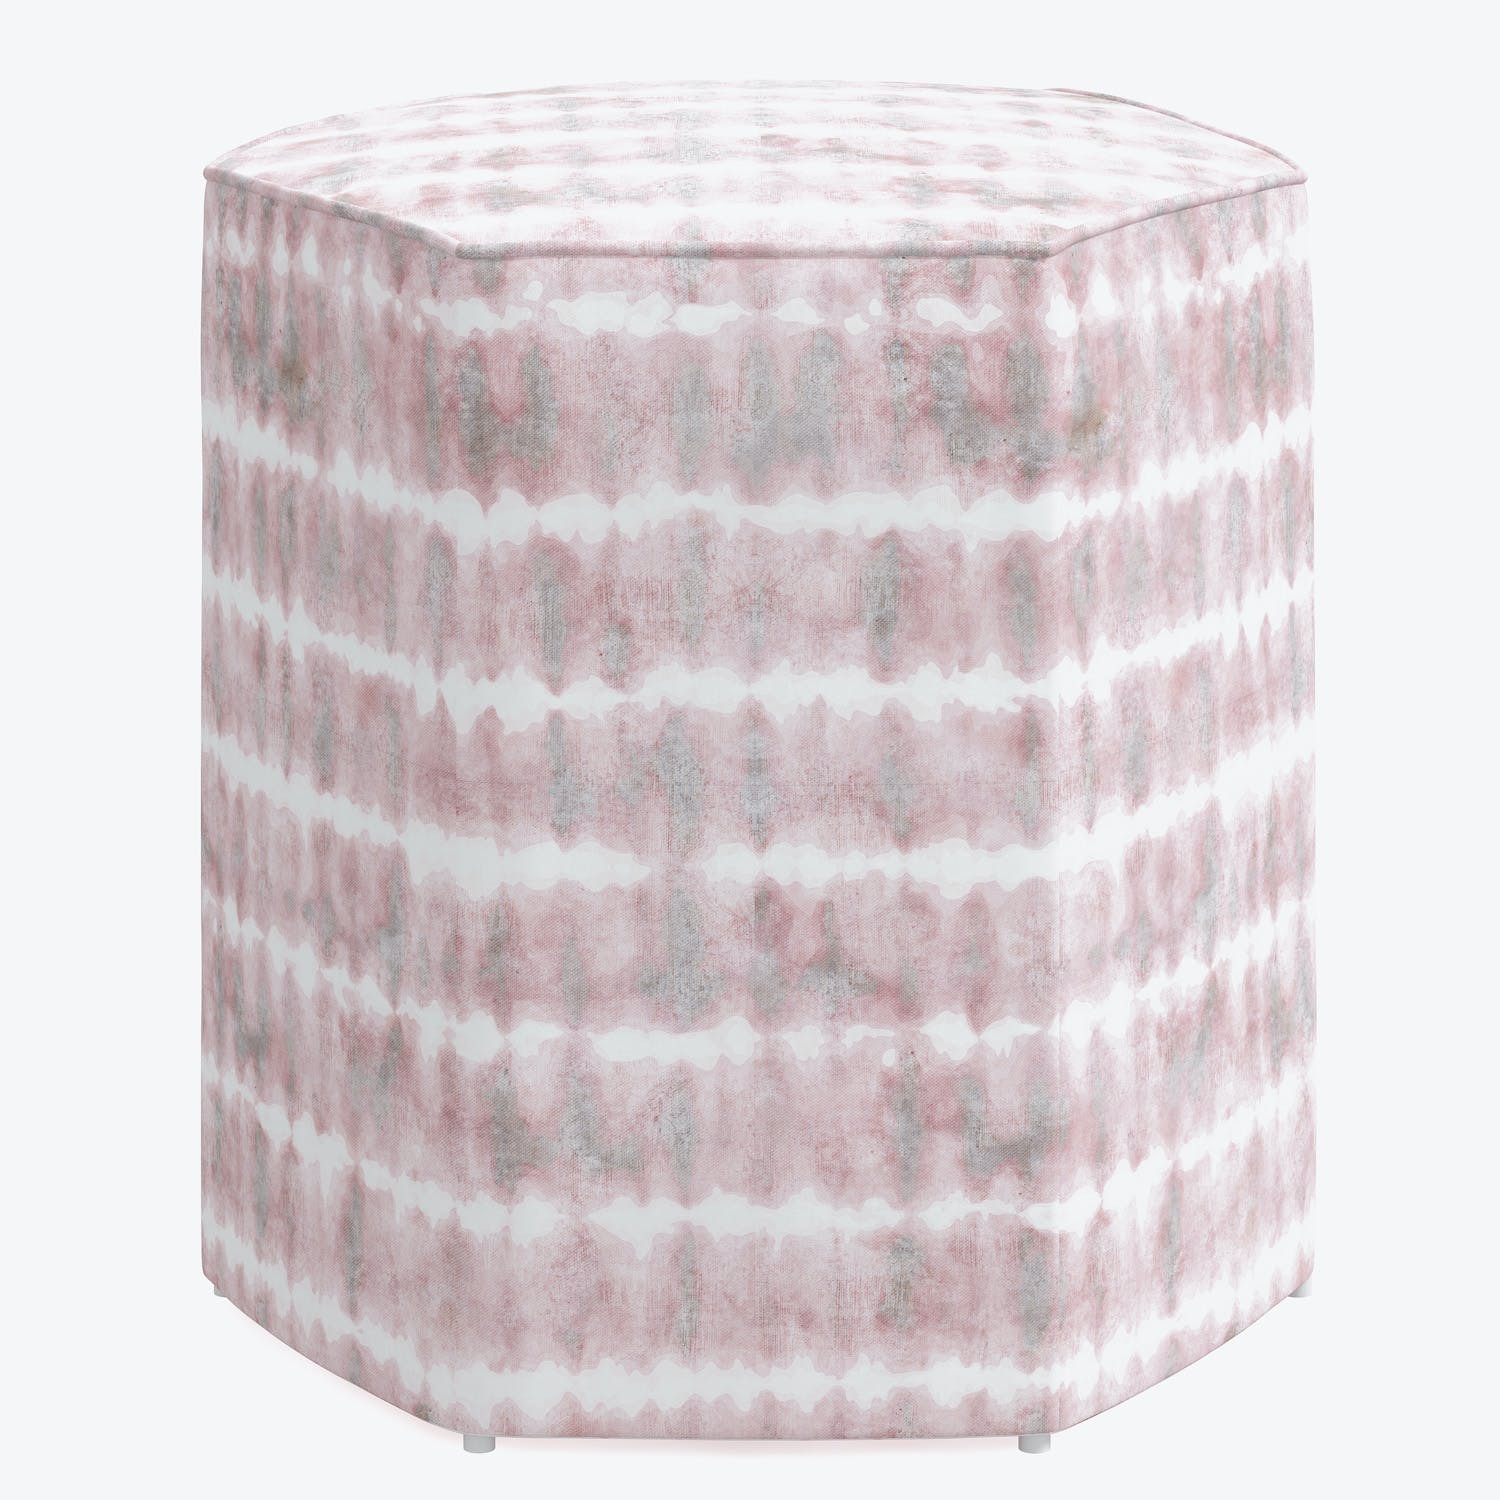 Soft, patterned ottoman adds a touch of color to room.